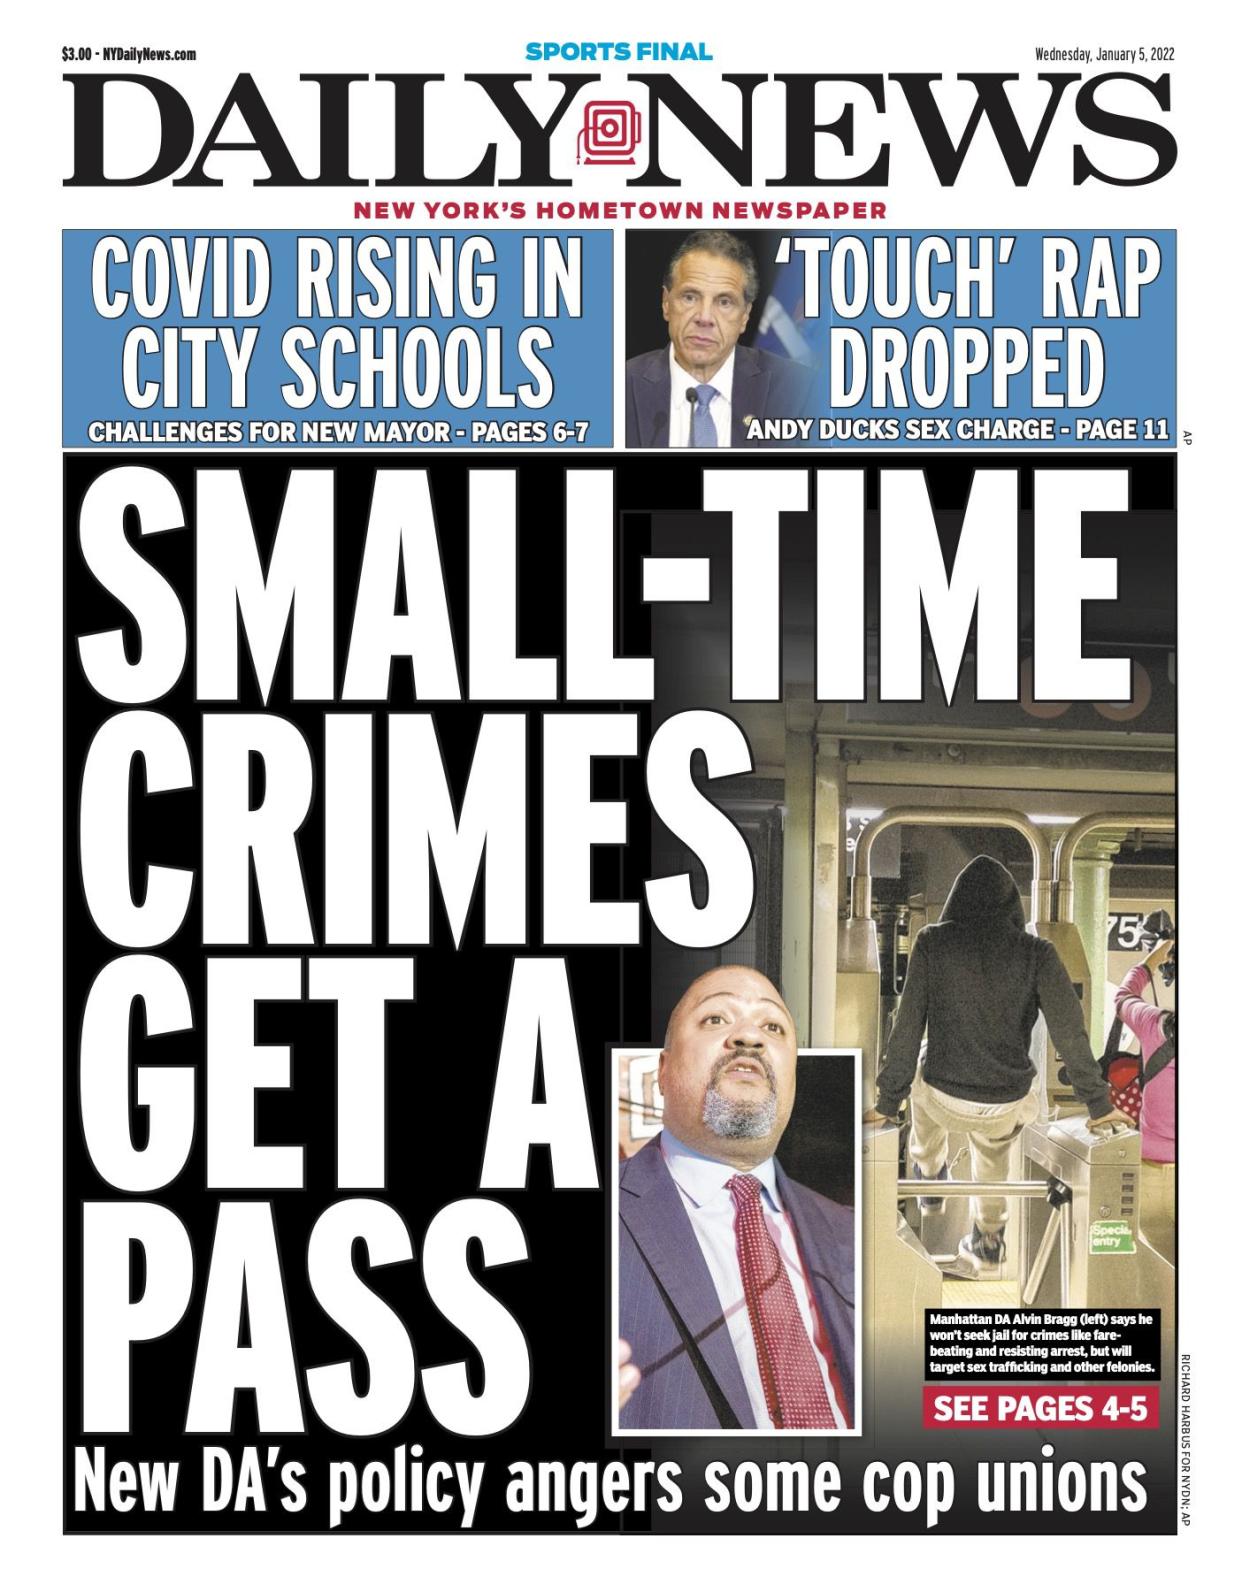 Front page for Jan. 5, 2022: New DA's policy angers some cop unions. Manhattan DA Alvin Bragg (left) says he won't seek jail for crimes like fare-beating and resisting arrest, but will target sex trafficking and other felonies.